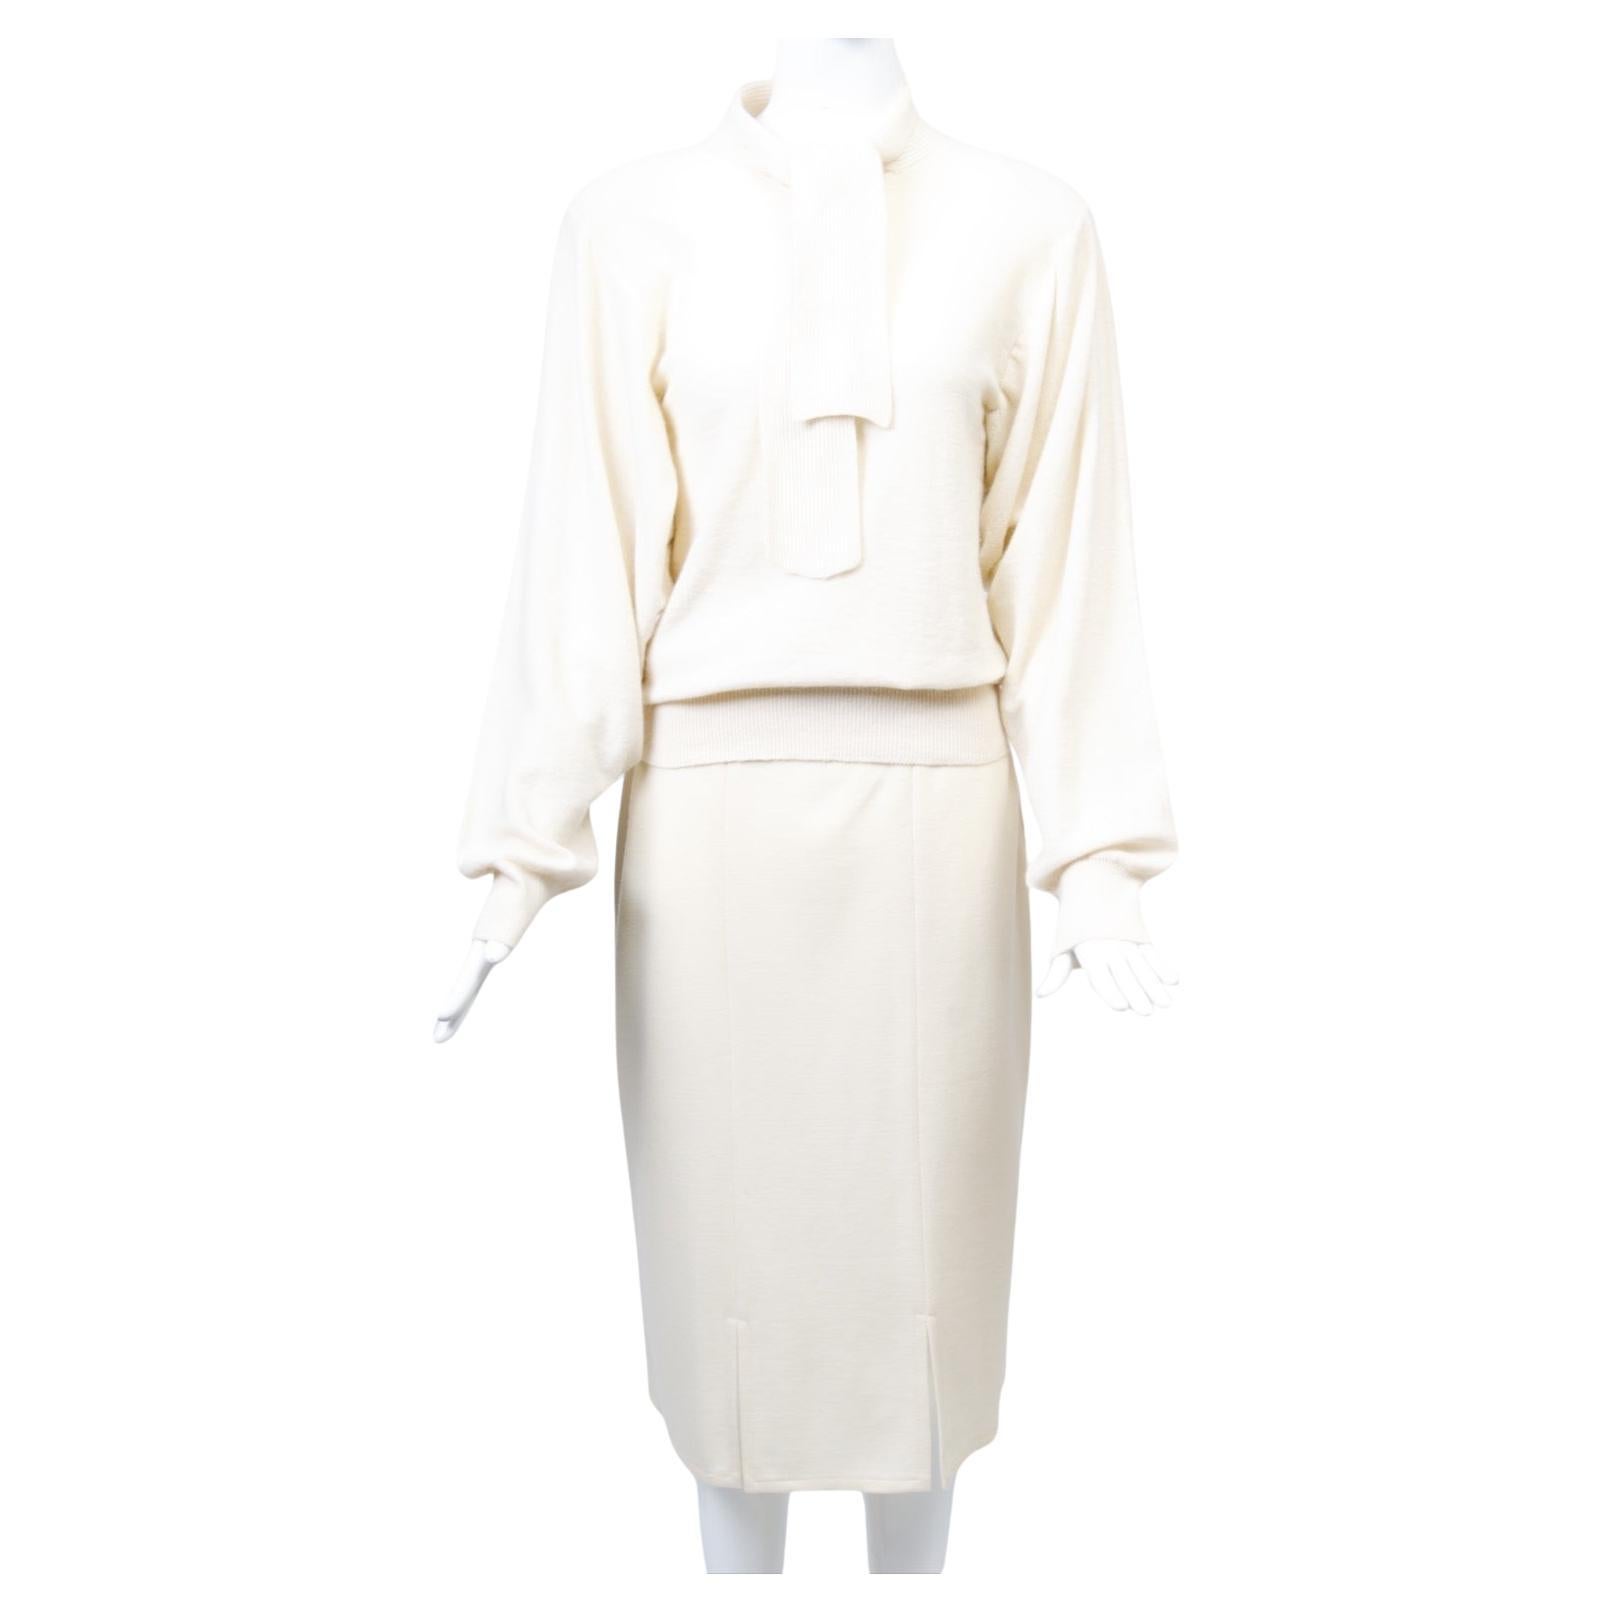 Quintessential Sonia Rykiel ensemble consisting of a pullover sweater and slim skirt in ivory wool knit, c.1980s. On top, the sweater is distnguished by a button opening in front and an attached tie in ribbed knit, while the body is crafted of fine